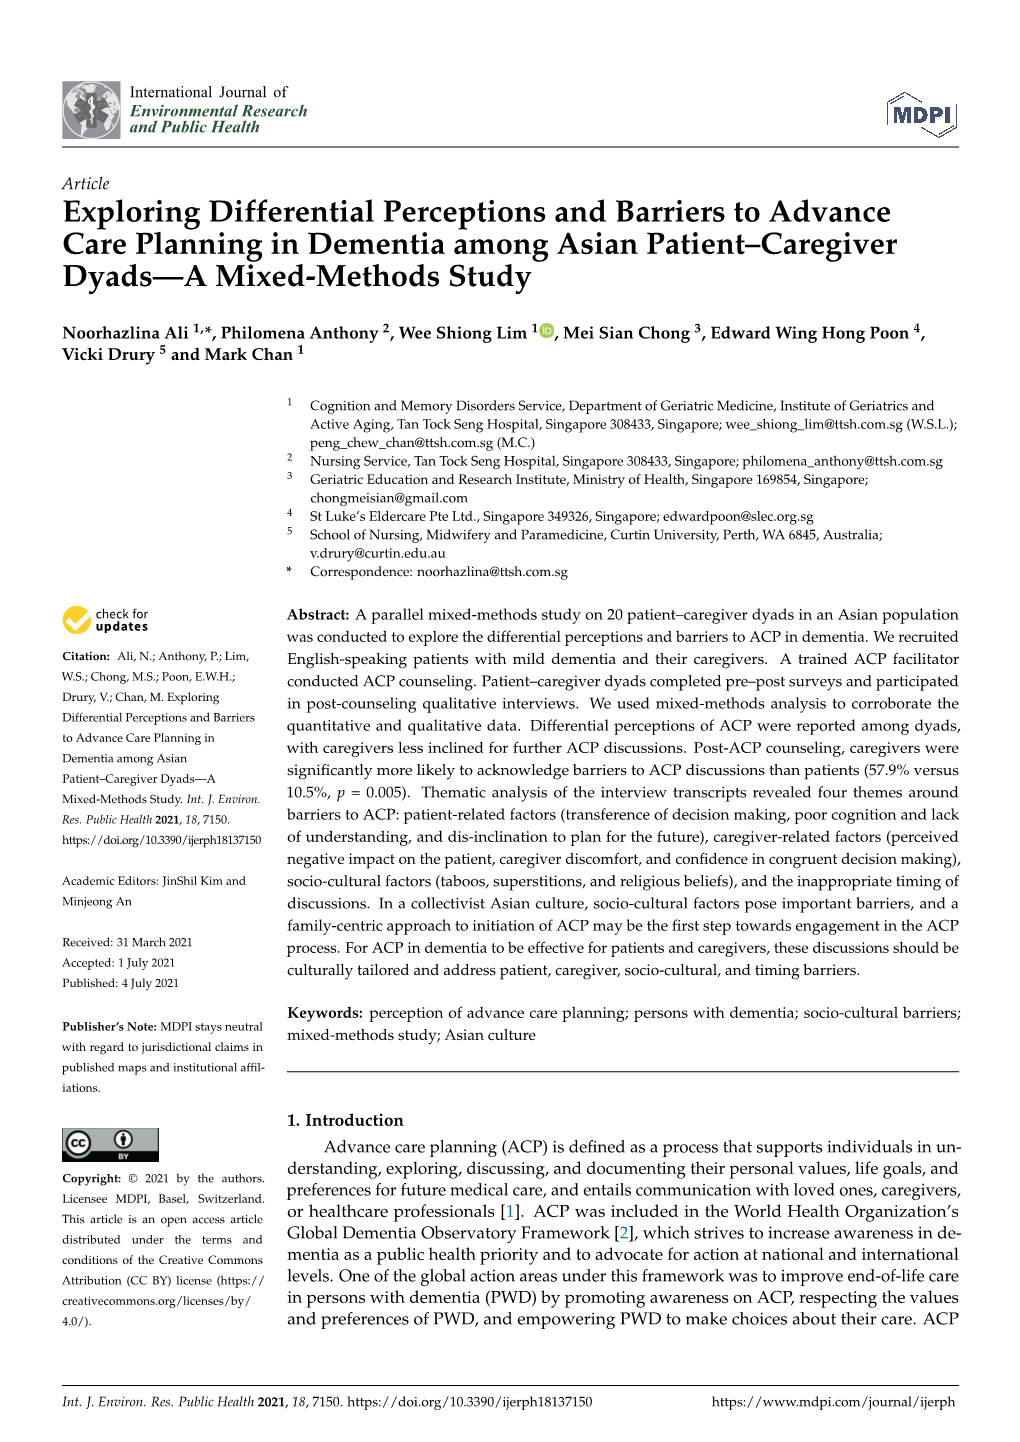 Exploring Differential Perceptions and Barriers to Advance Care Planning in Dementia Among Asian Patient–Caregiver Dyads—A Mixed-Methods Study